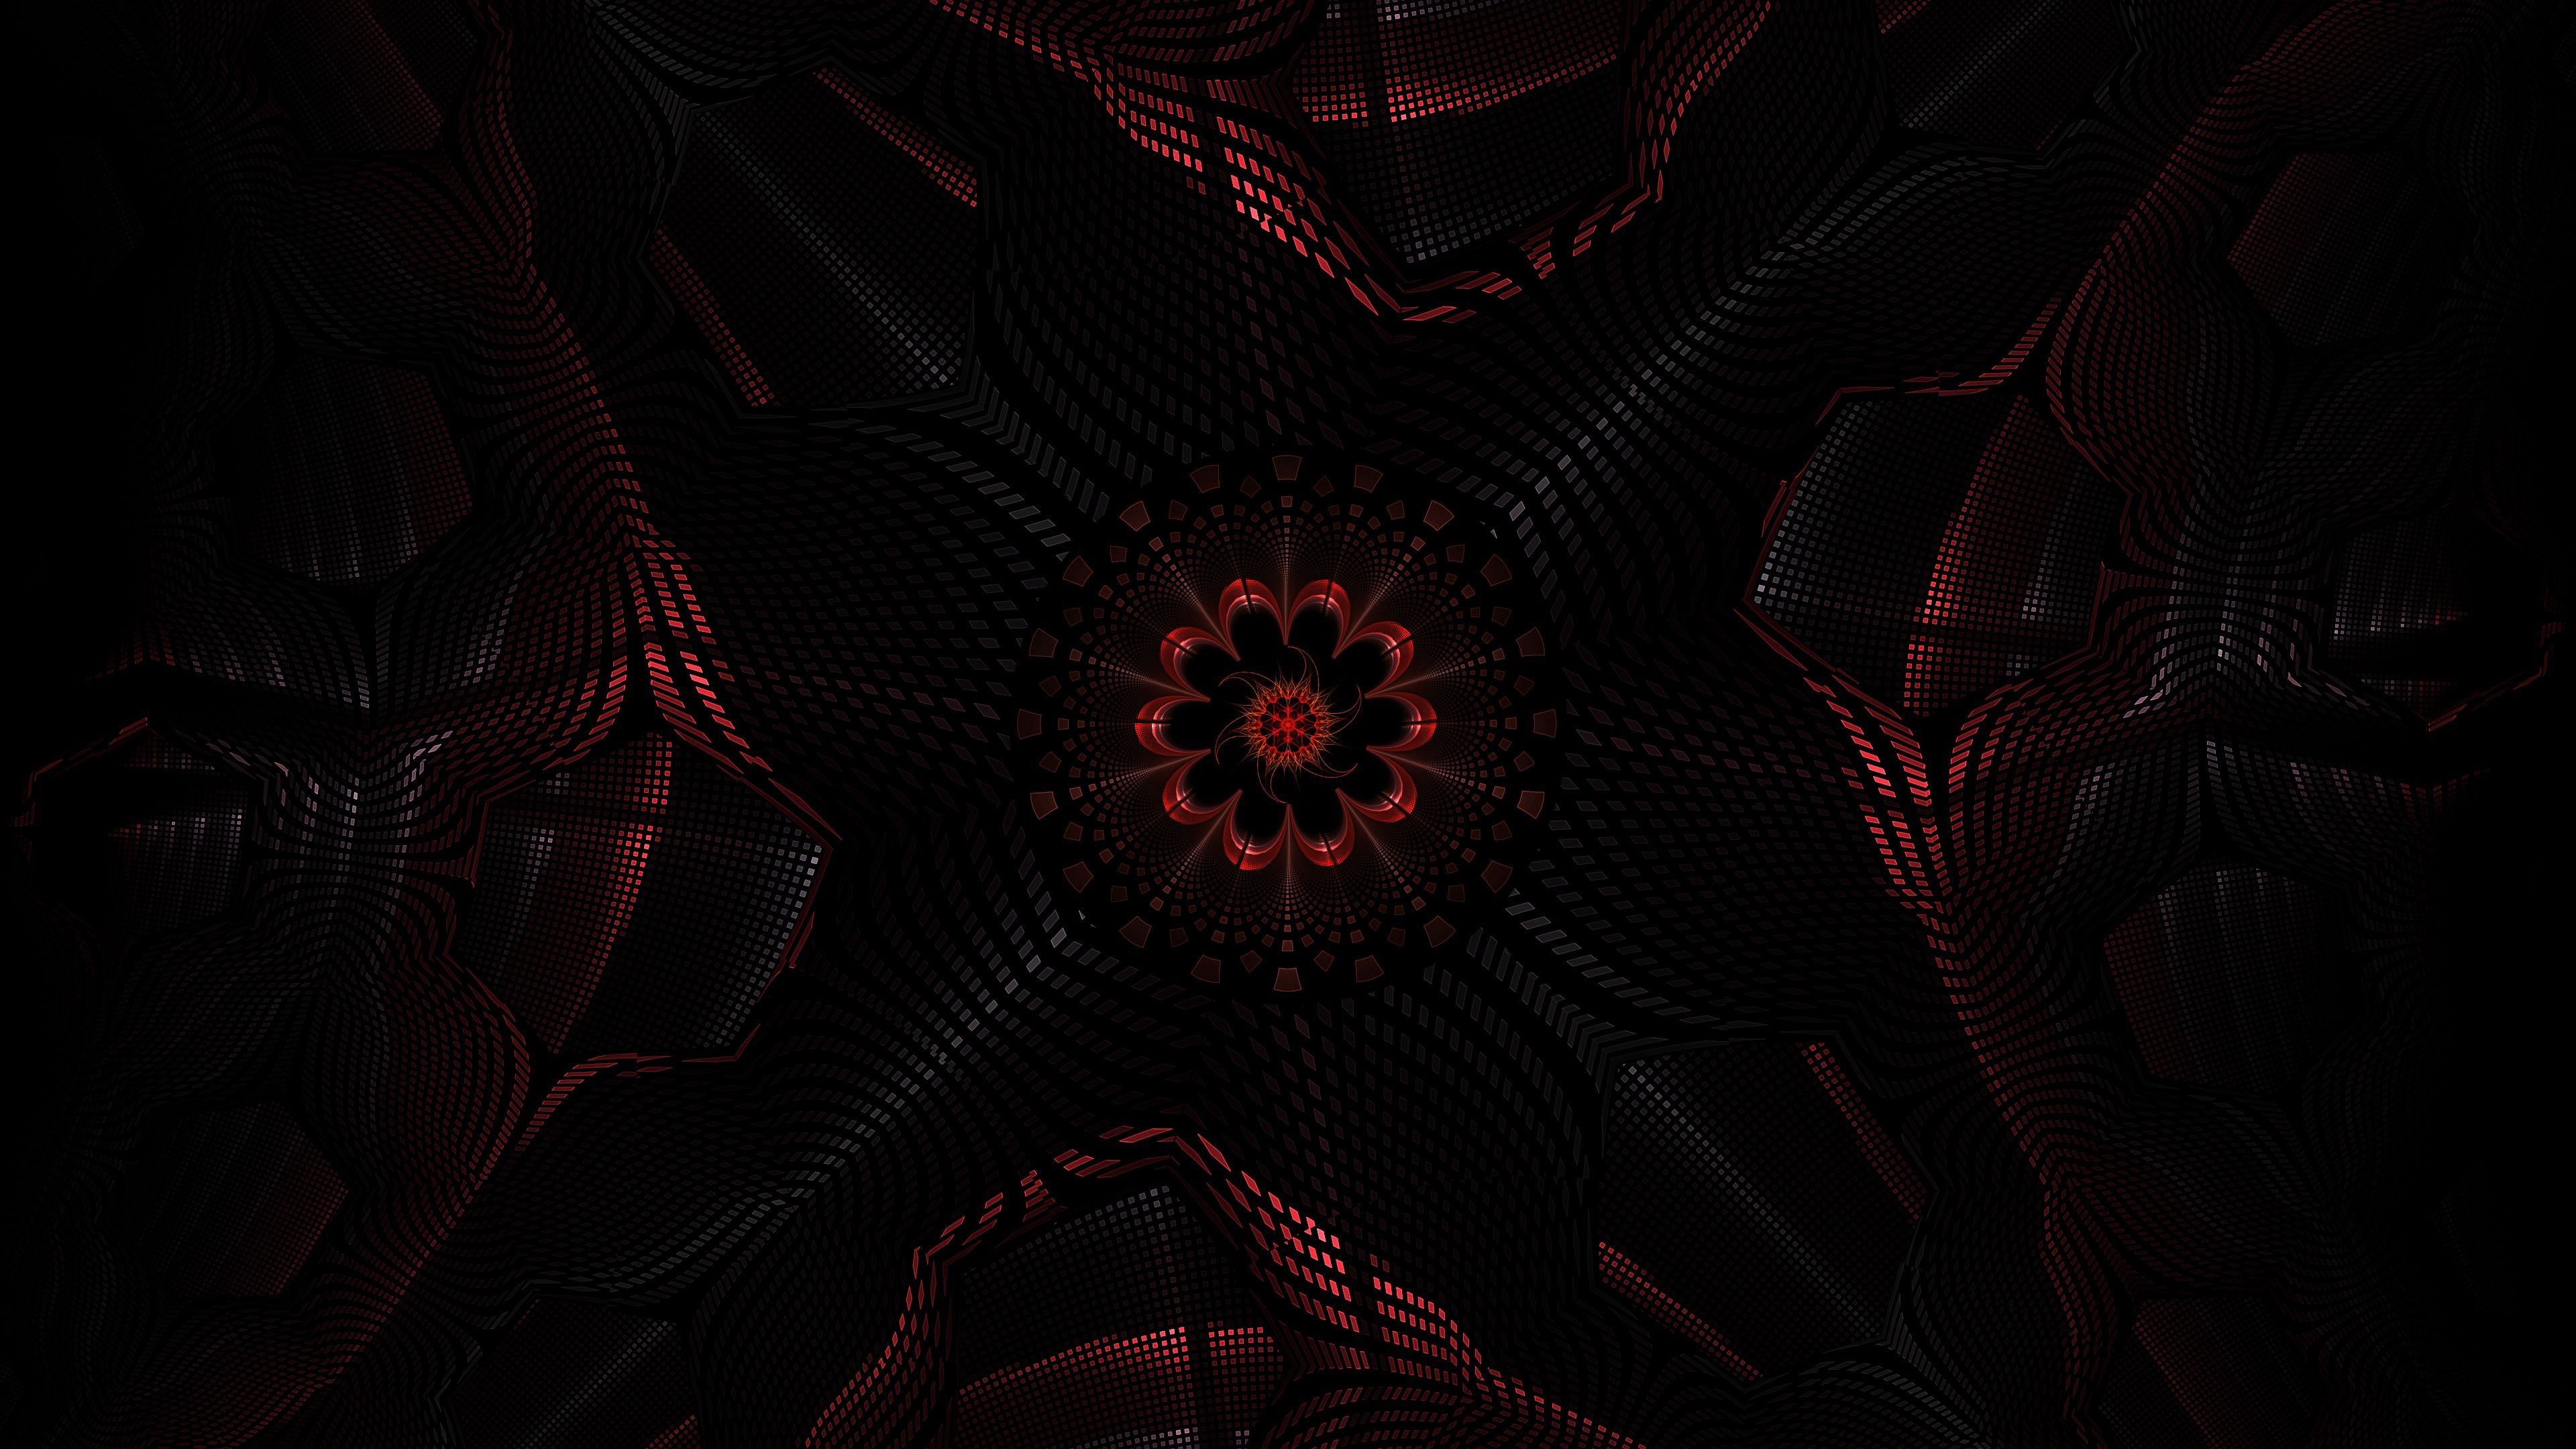 Red fractal, Top free backgrounds, Colorful imagery, Abstract design, 3840x2160 4K Desktop